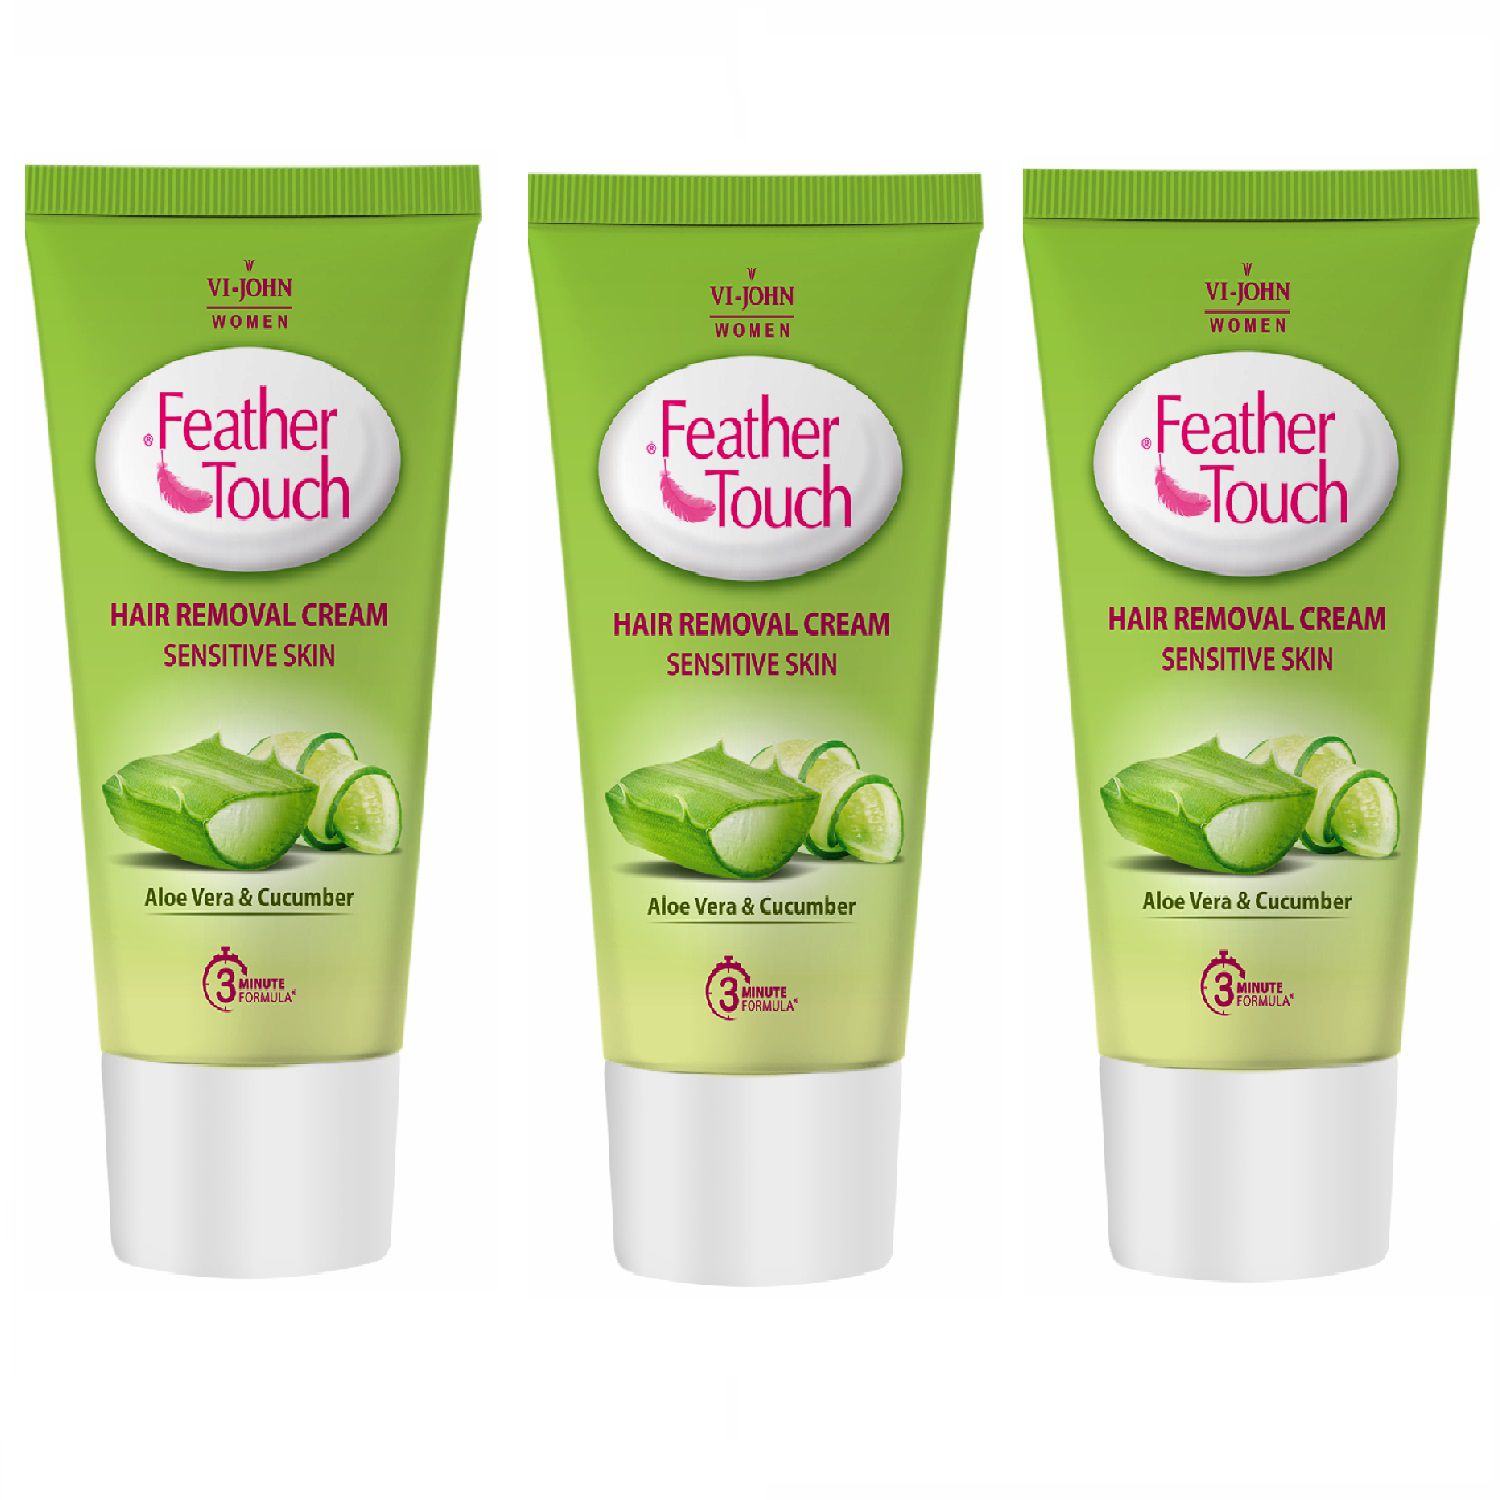     			VIJOHN Feather Touch Cucumber & Aloevera Hair Removal Cream for Sensitive Skin 40g Each (Pack of 2)